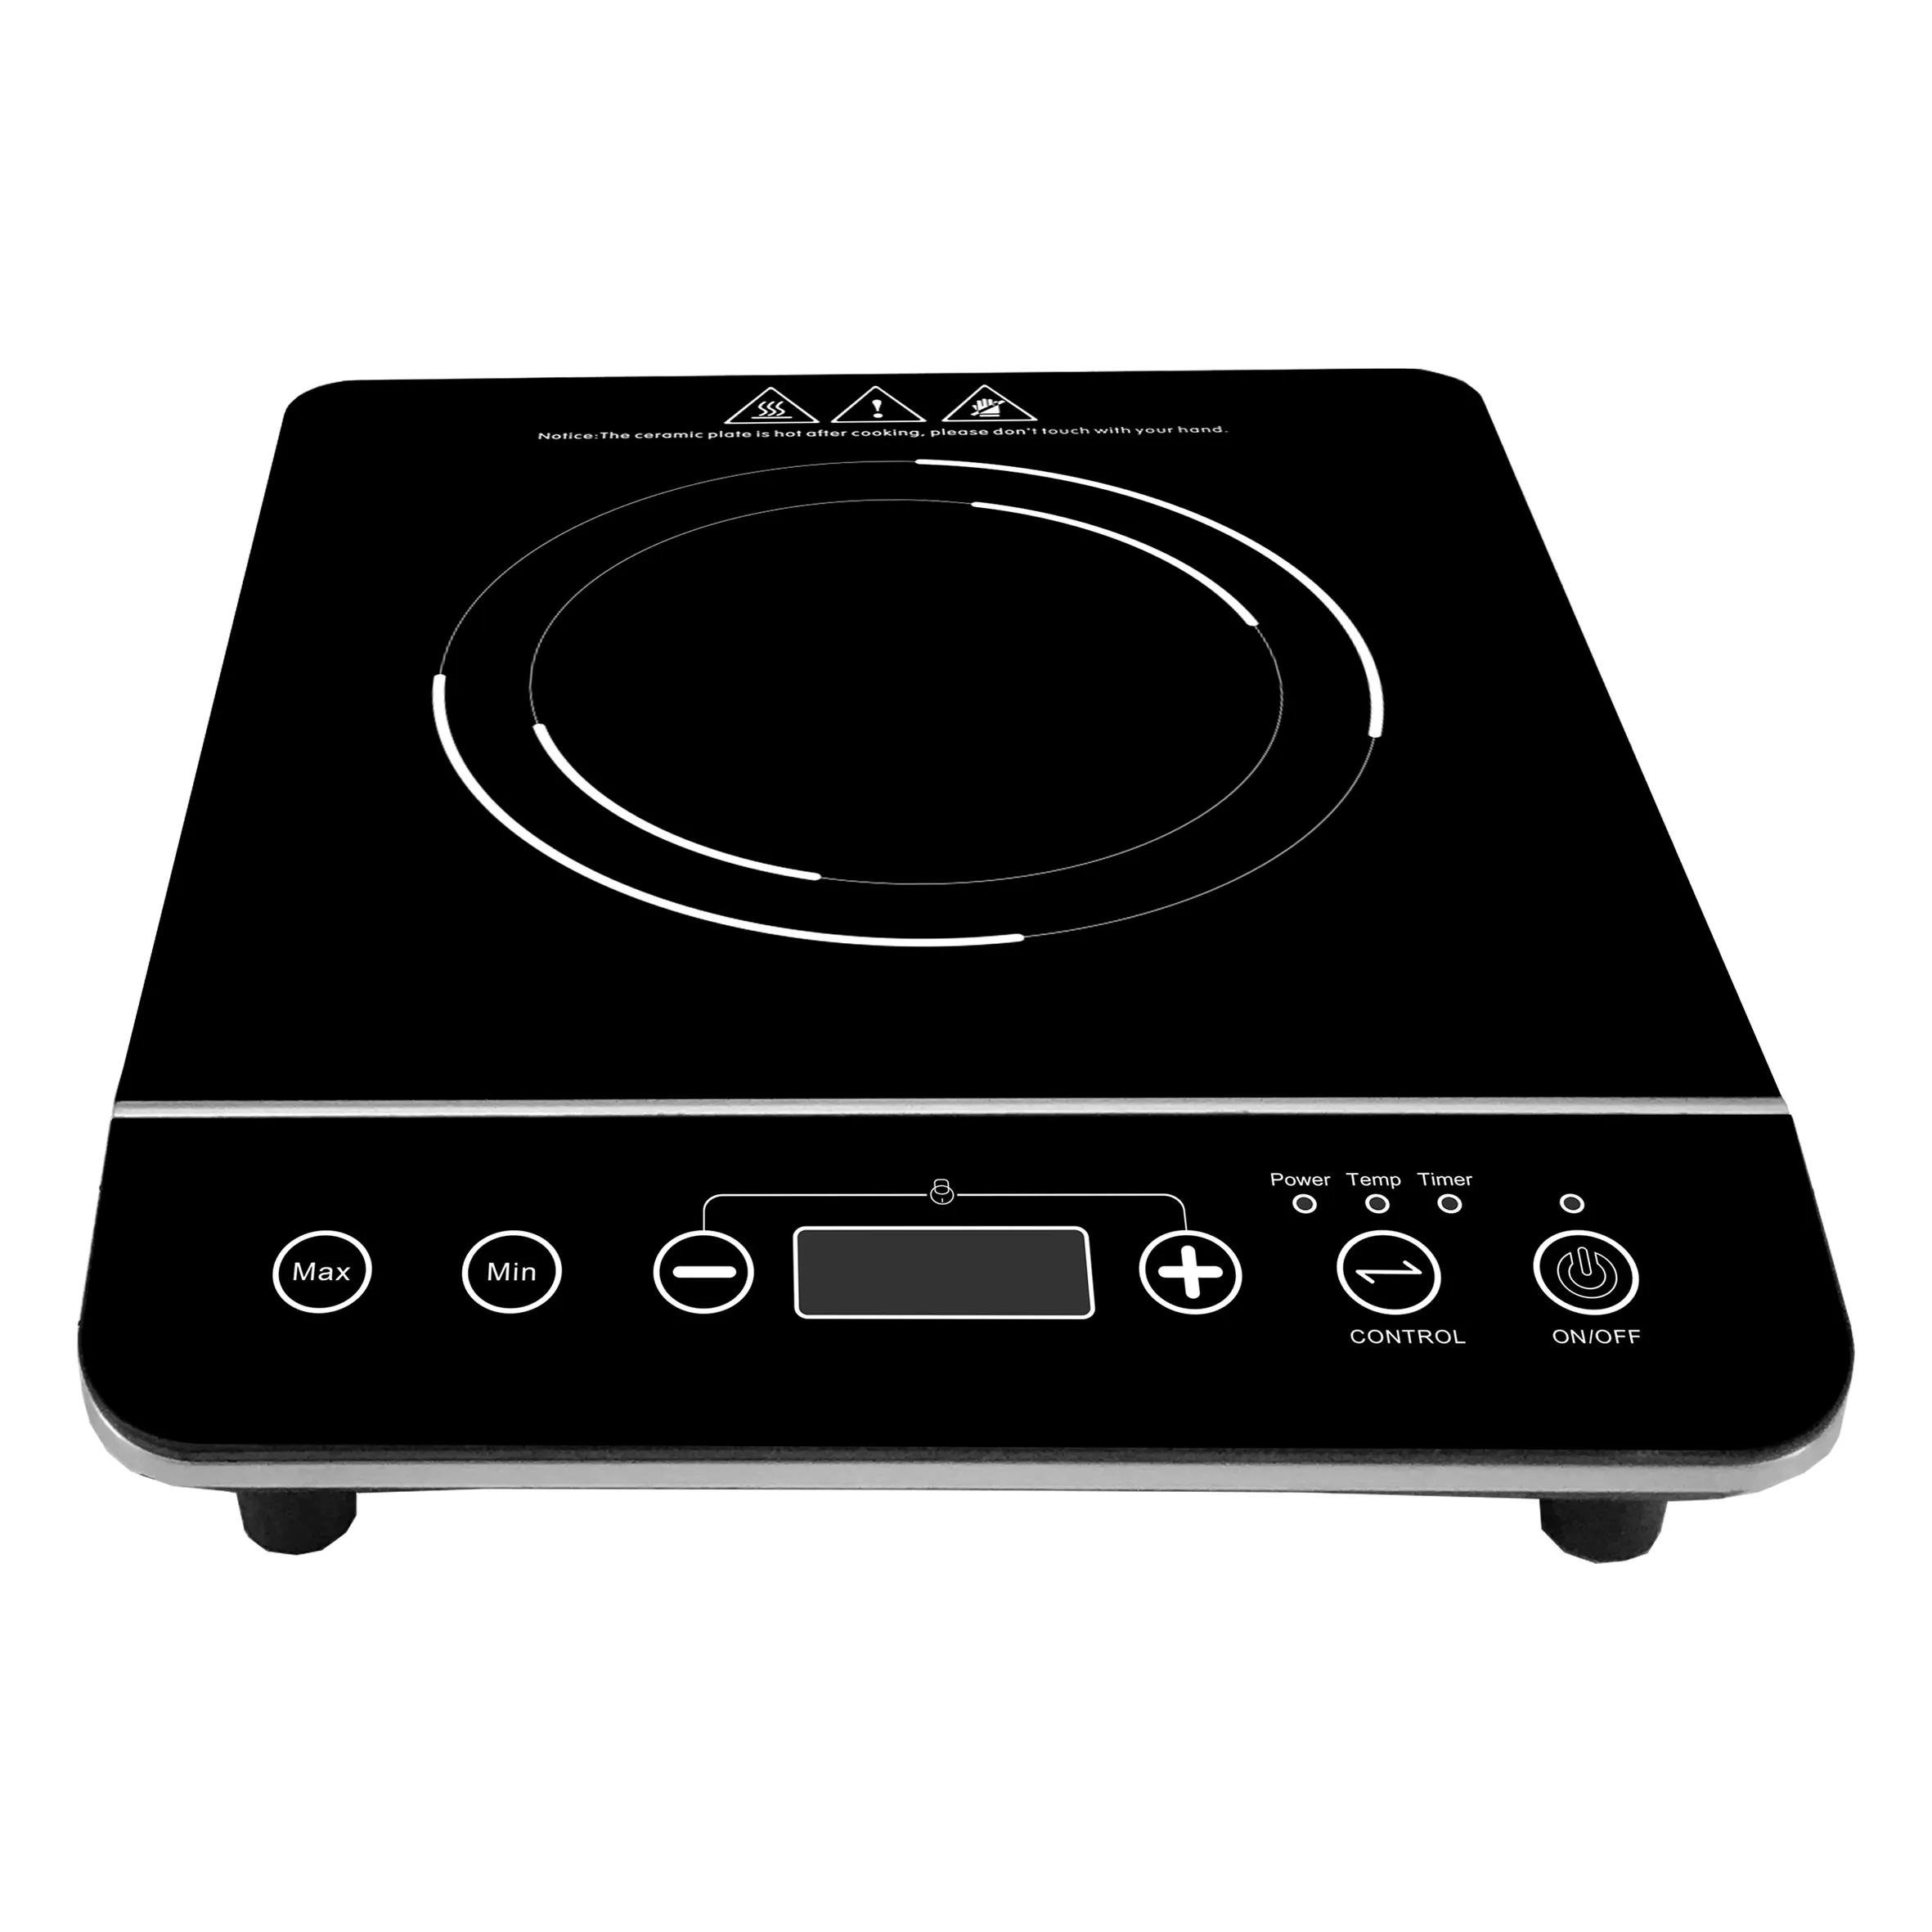 Victro Ceramic Glass 10 Level 200W-2000W Heat Temp IH Cooker Portable Cooker Induction Cooktop Etl